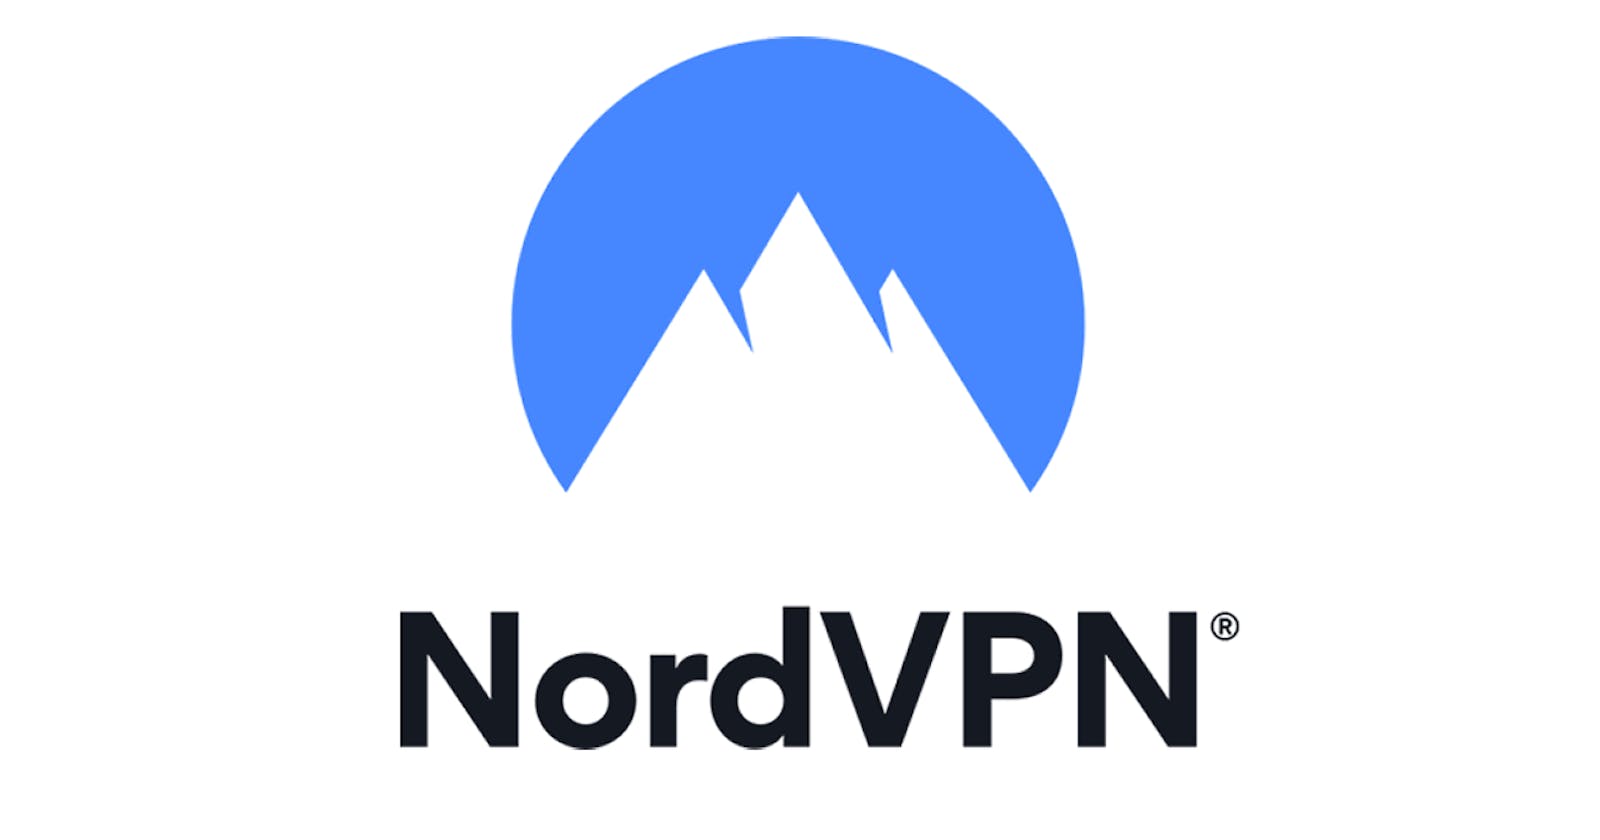 Installing NordVPN on Arch Linux